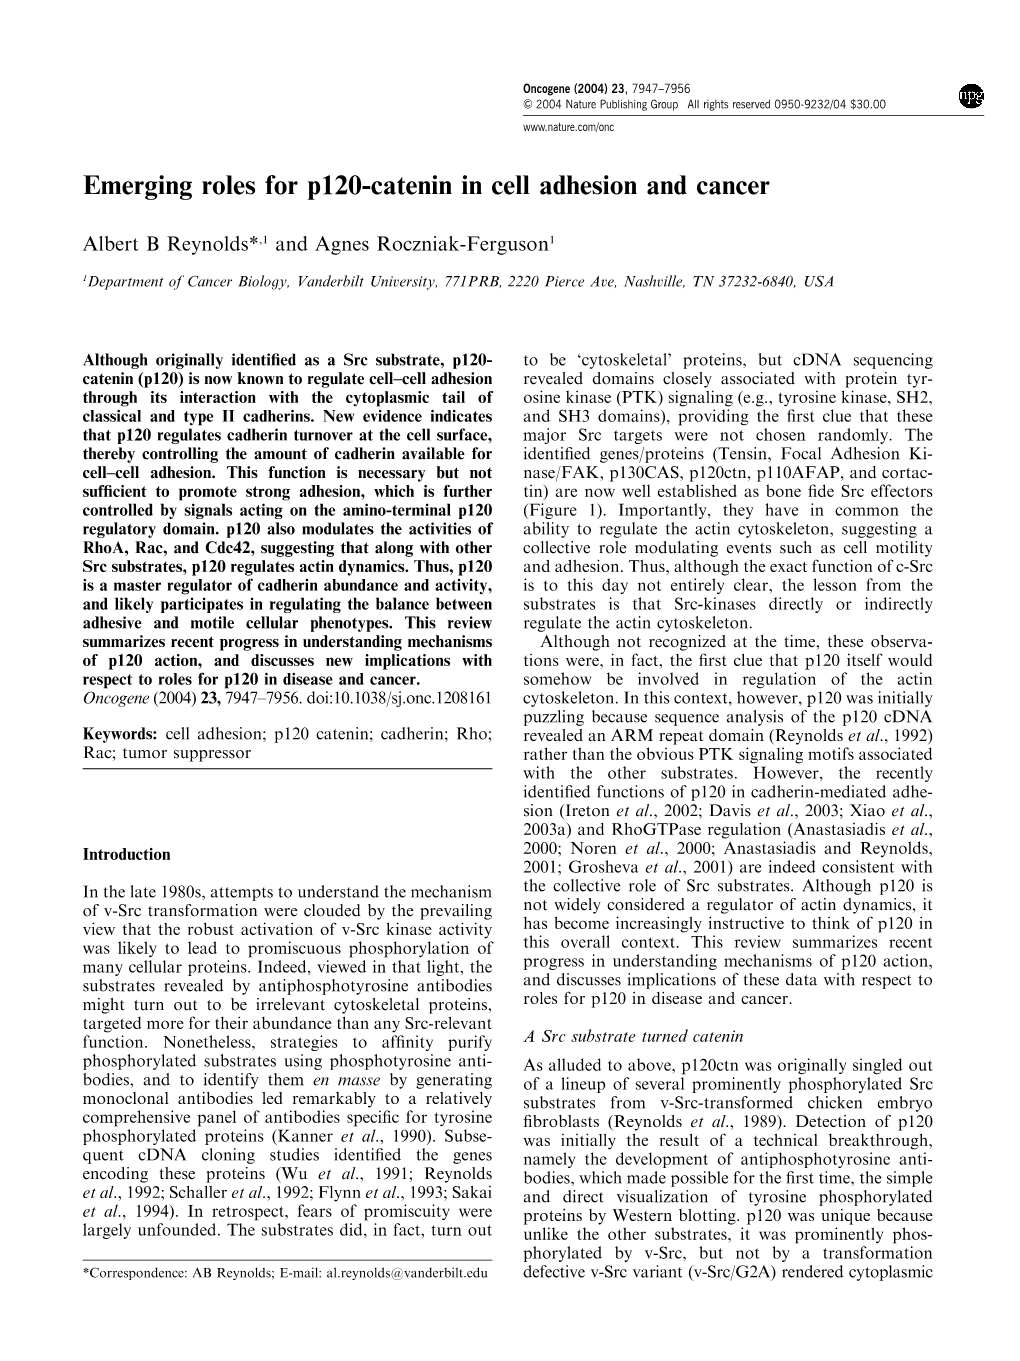 Emerging Roles for P120-Catenin in Cell Adhesion and Cancer